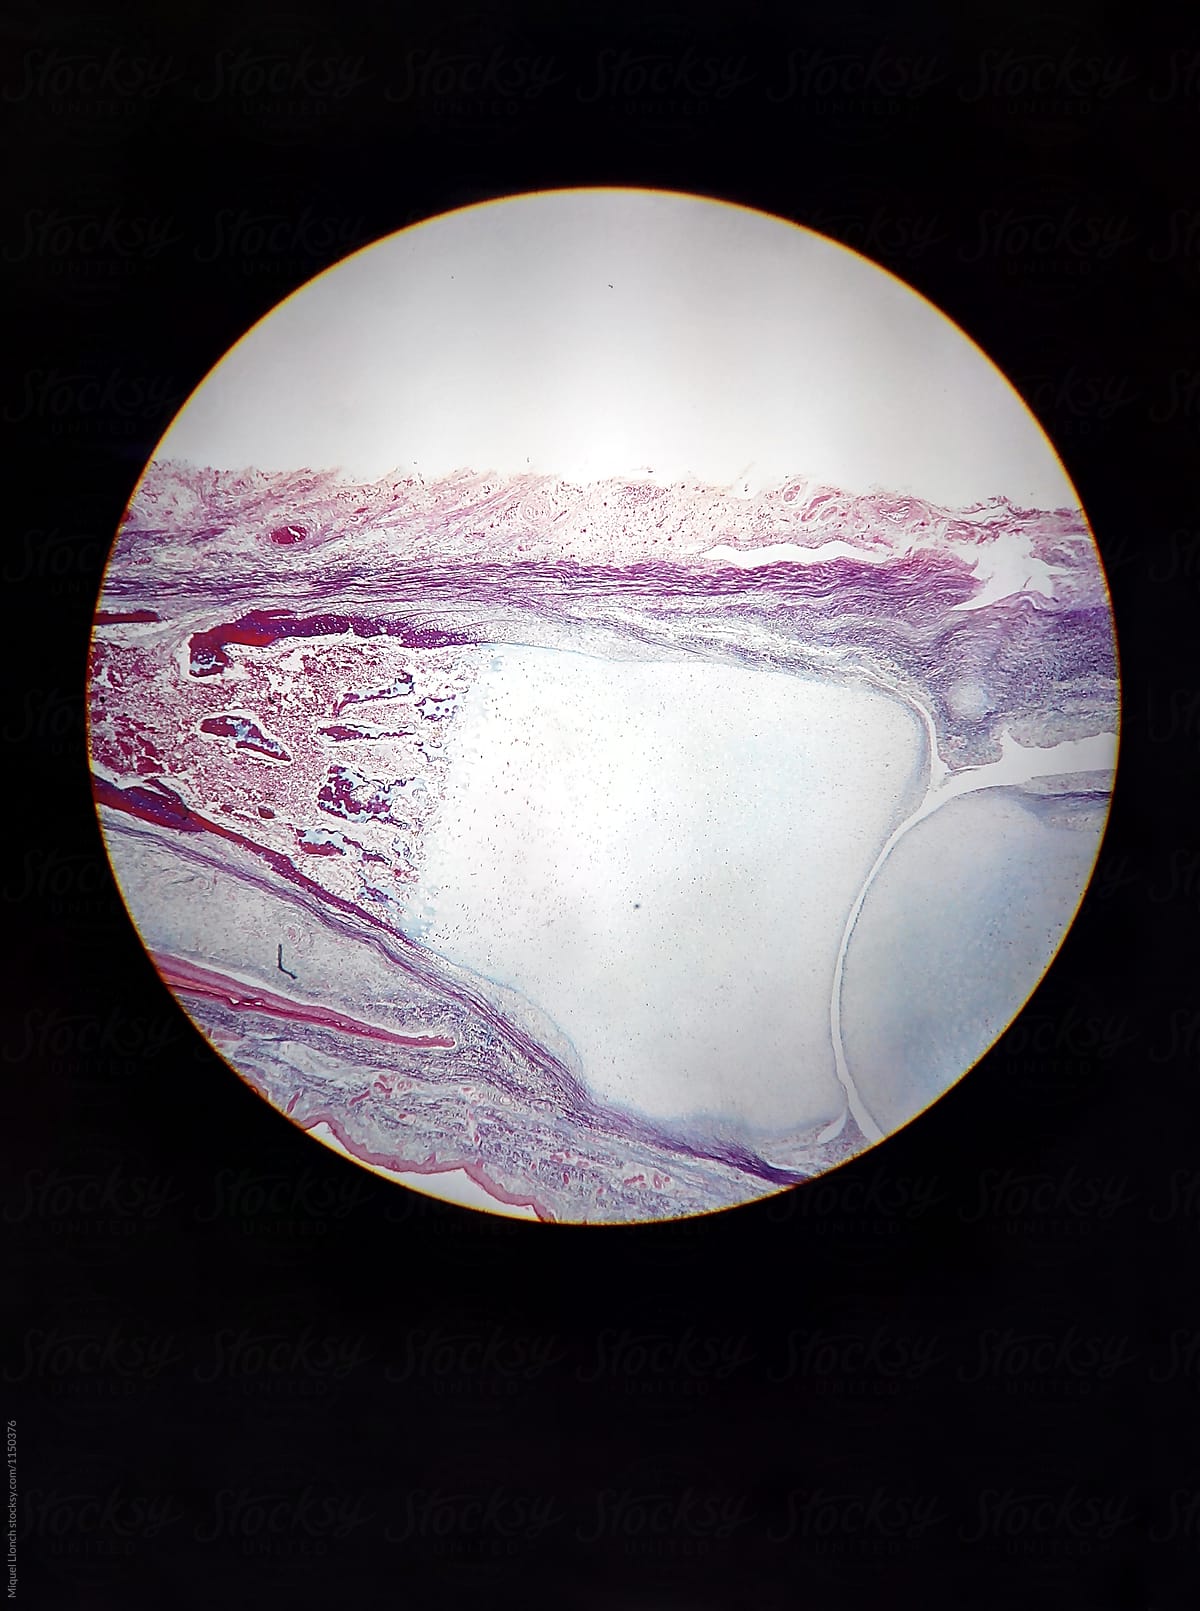 Microscope photography of different organic tissues made with a phone camera